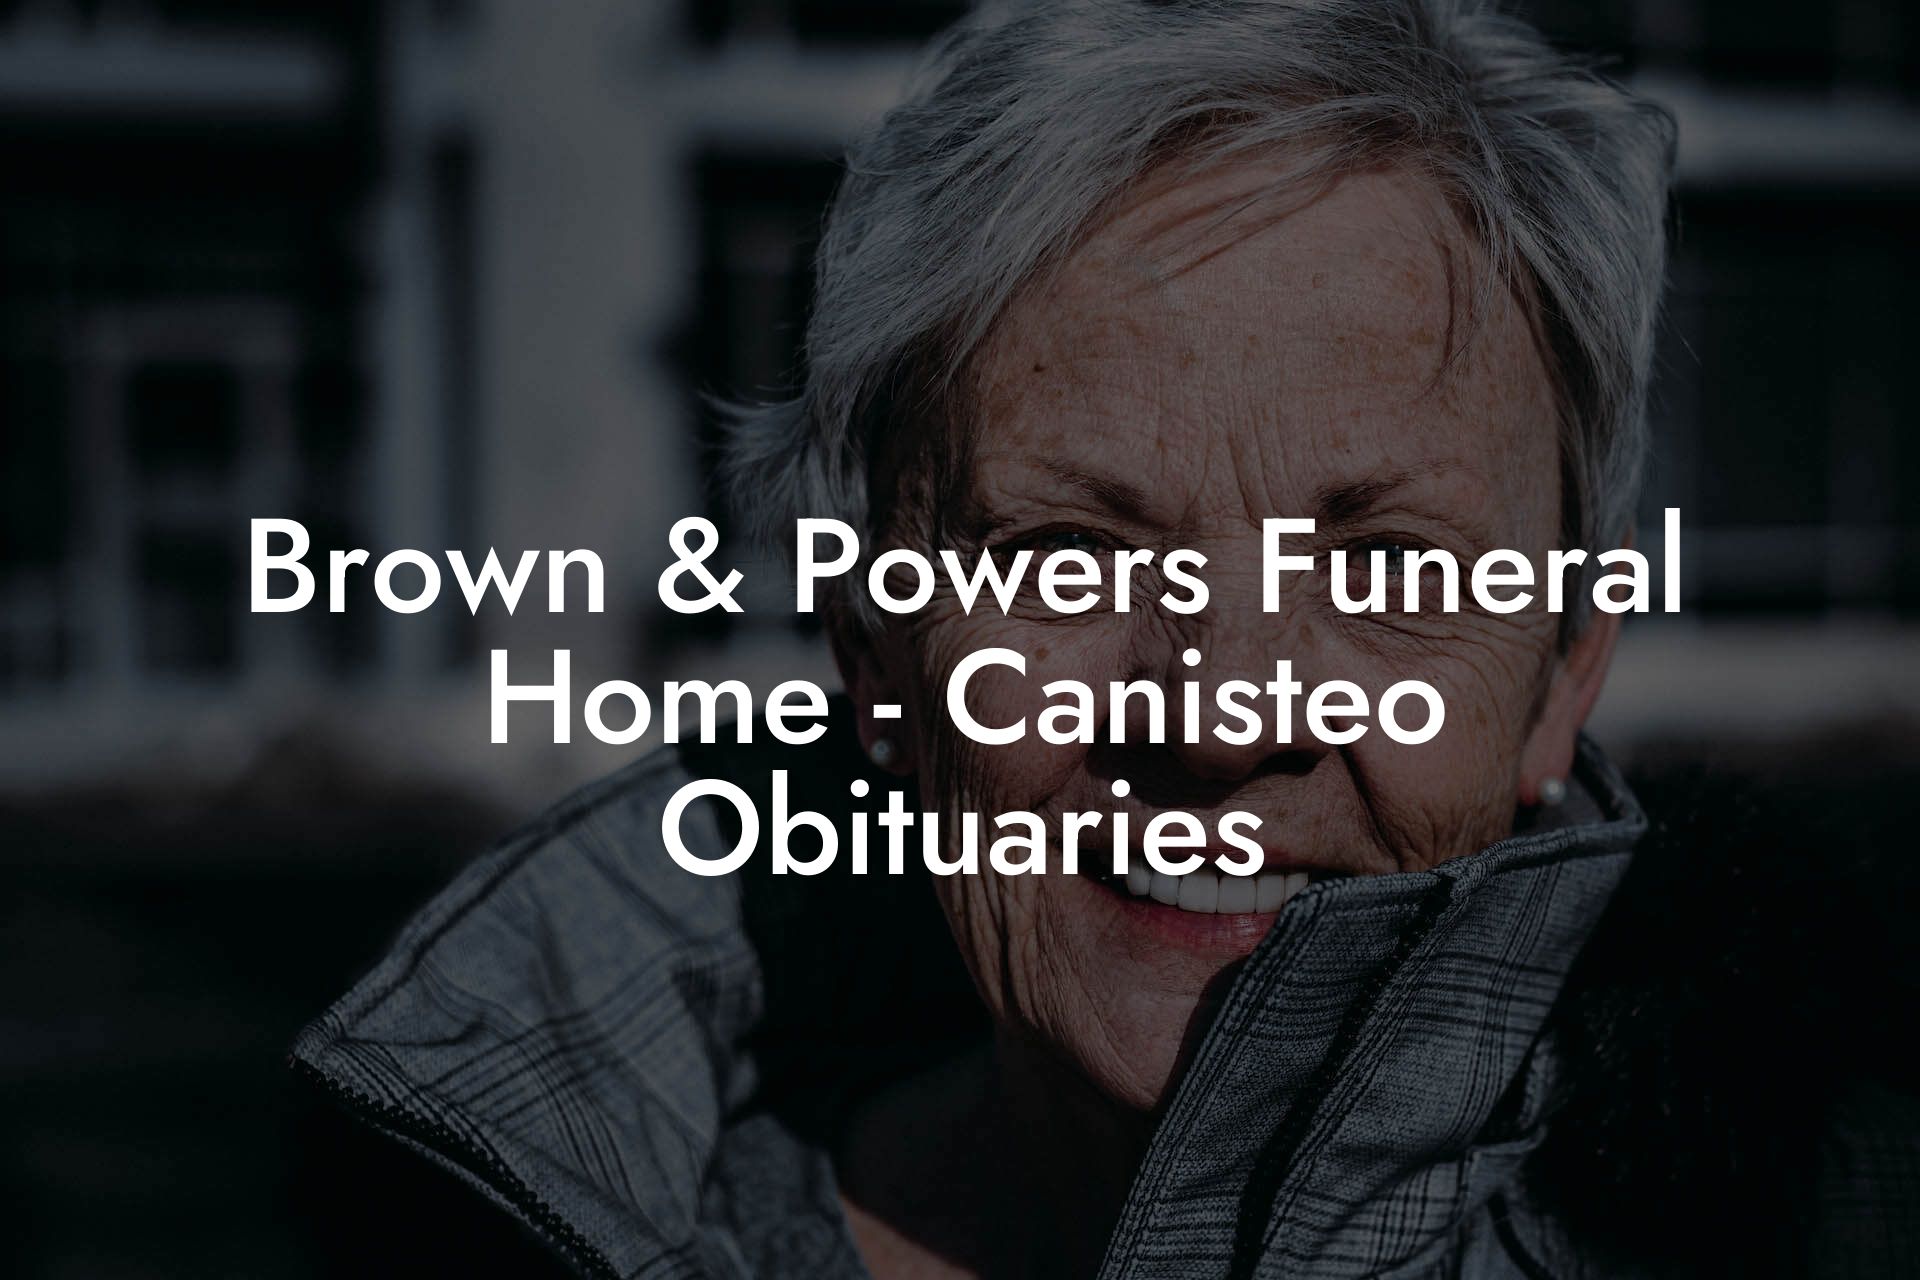 Brown & Powers Funeral Home - Canisteo Obituaries